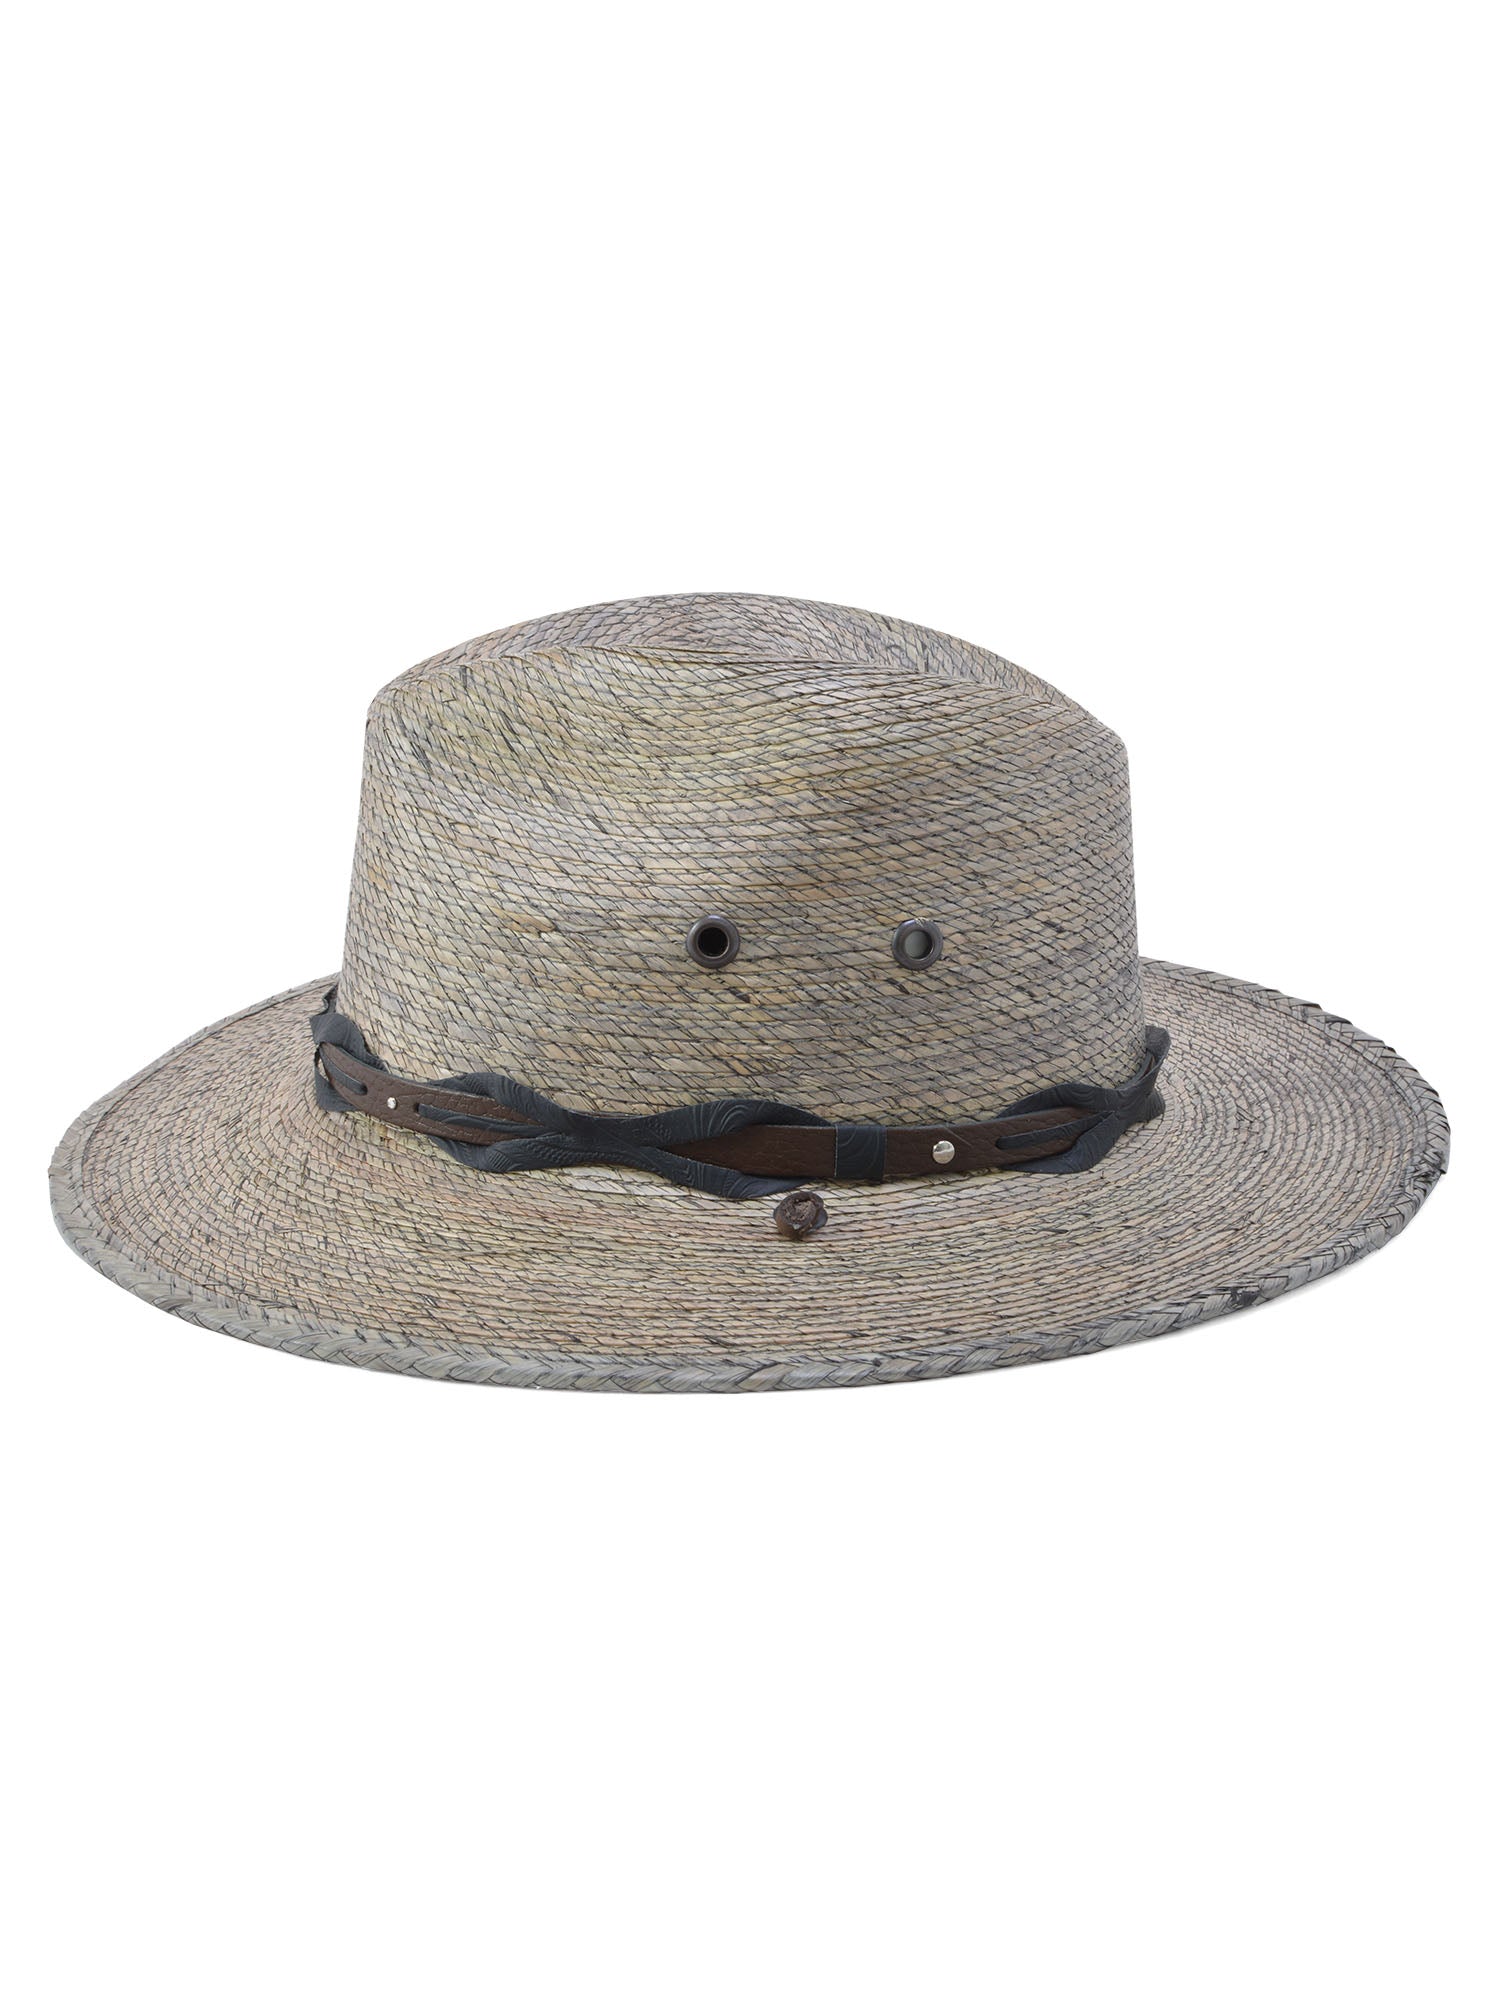 Stetson Marco Stained Palm Straw Hat